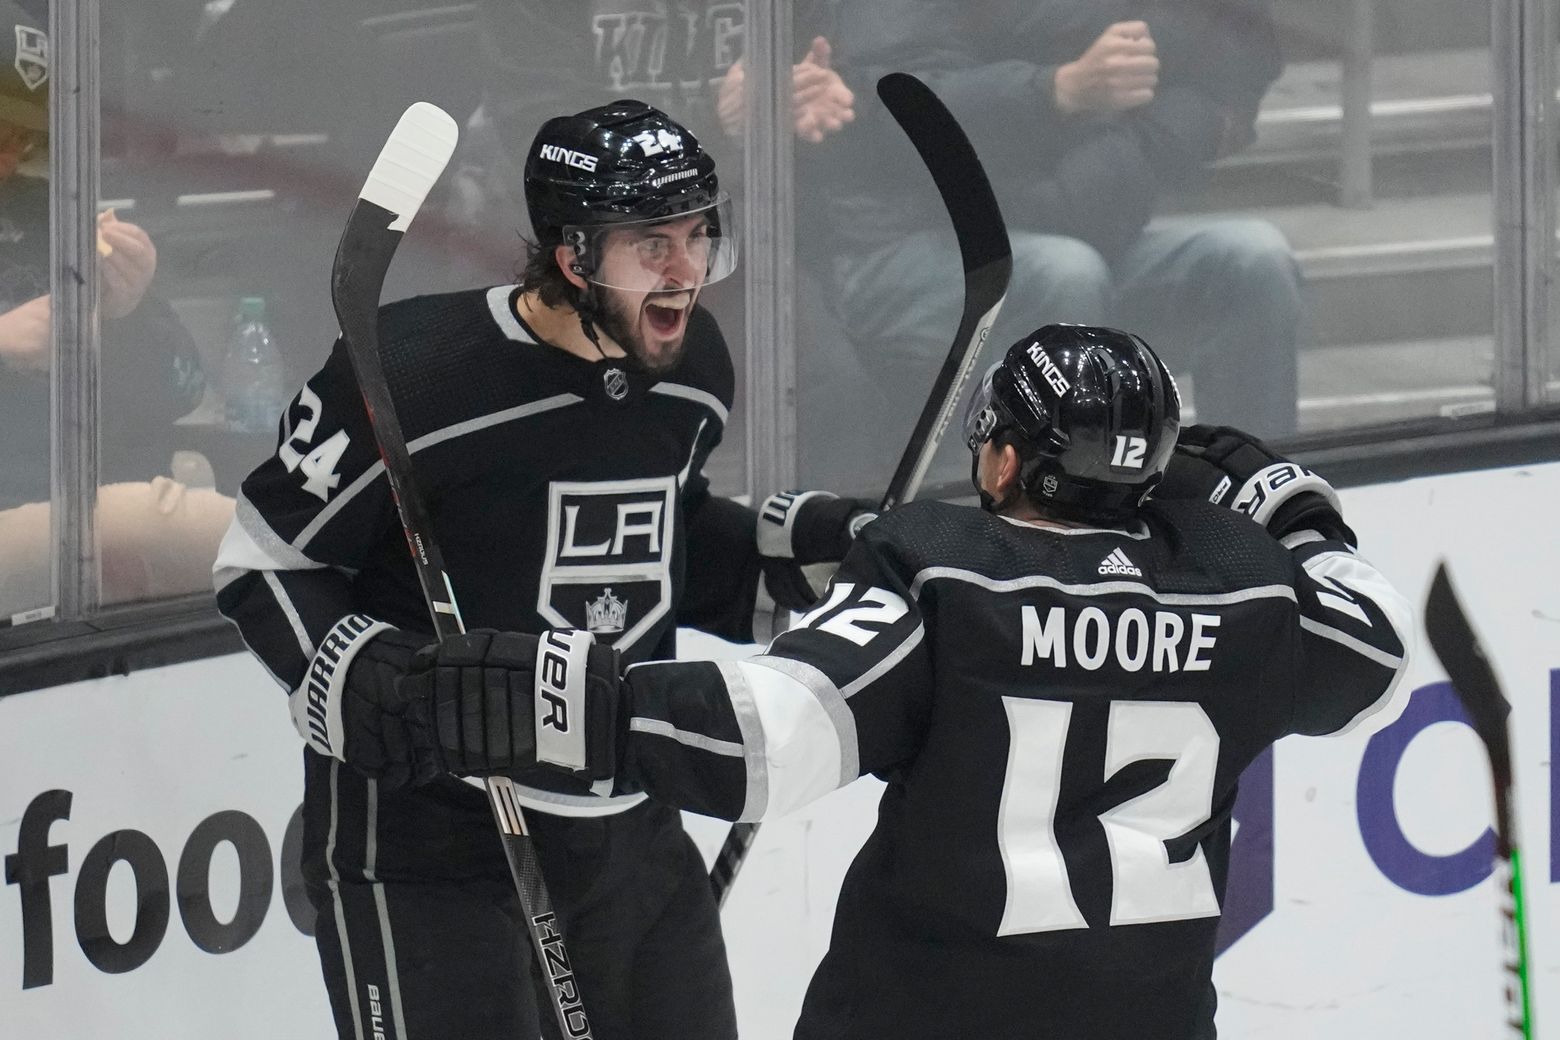 NHL - Beautiful LA Kings threads by adidas that are, well